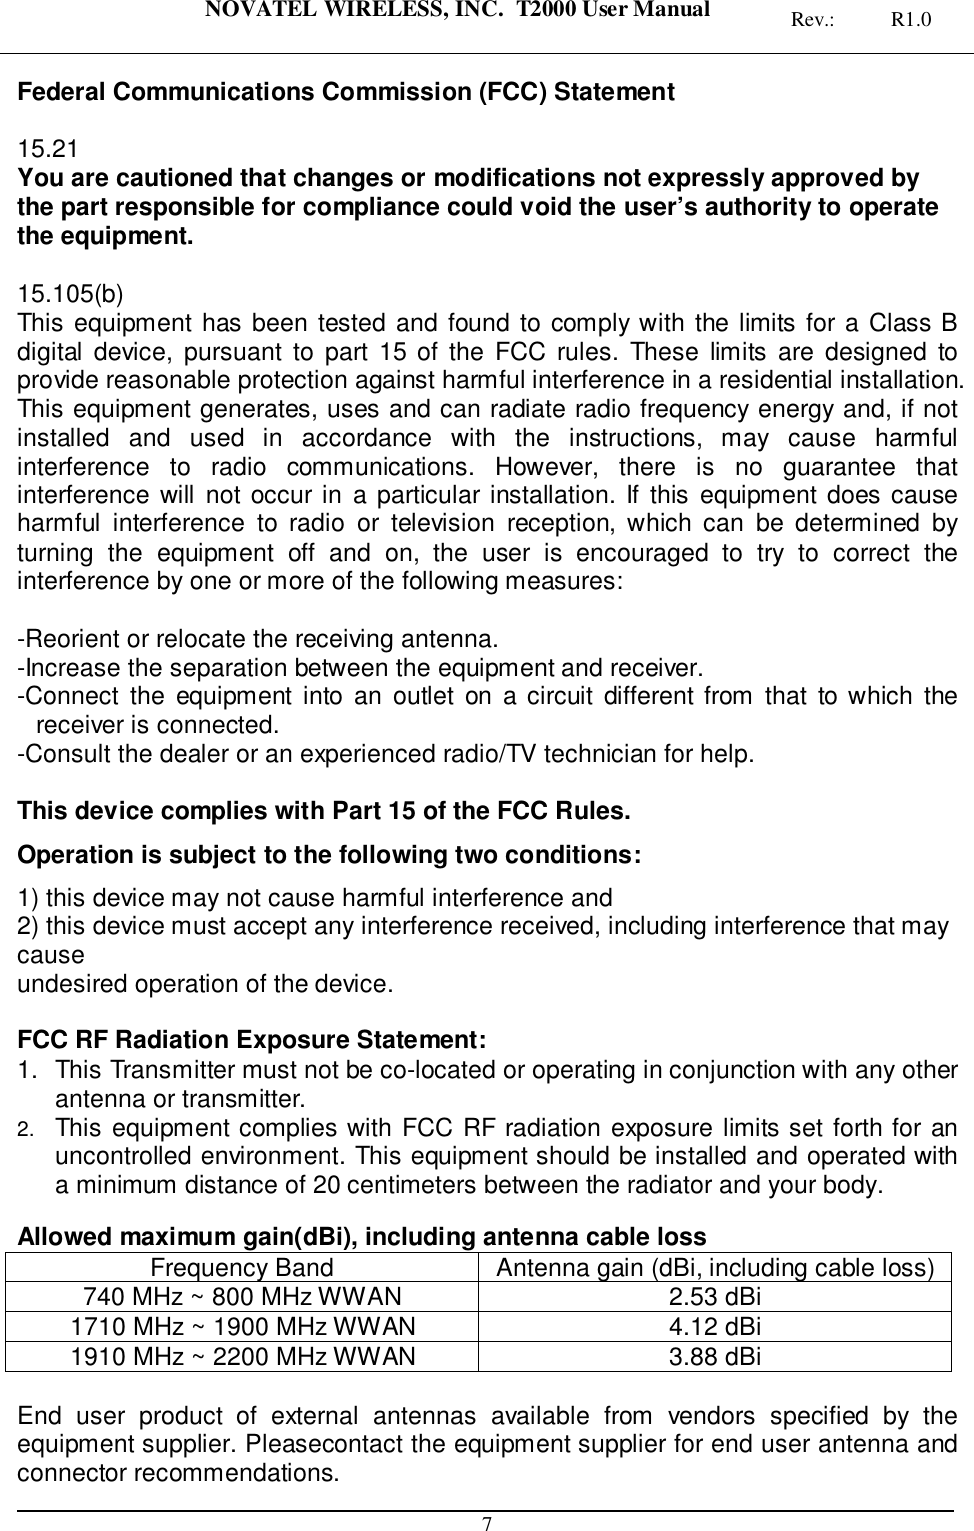 NOVATEL WIRELESS, INC. T2000 User Manual Rev.: R1.07Federal Communications Commission (FCC) Statement15.21You are cautioned that changes or modifications not expressly approved bythe part responsible for compliance could void the user’s authority to operatethe equipment.15.105(b)This equipment has been tested and found to comply with the limits for a Class Bdigital device, pursuant to part 15 of the FCC rules. These limits are designed toprovide reasonable protection against harmful interference in a residential installation.This equipment generates, uses and can radiate radio frequency energy and, if notinstalled and used in accordance with the instructions, may cause harmfulinterference to radio communications. However, there is no guarantee thatinterference will not occur in a particular installation. If this equipment does causeharmful interference to radio or television reception, which can be determined byturning the equipment off and on, the user is encouraged to try to correct theinterference by one or more of the following measures:-Reorient or relocate the receiving antenna.-Increase the separation between the equipment and receiver.-Connect the equipment into an outlet on a circuit different from that to which thereceiver is connected.-Consult the dealer or an experienced radio/TV technician for help.This device complies with Part 15 of the FCC Rules.Operation is subject to the following two conditions:1) this device may not cause harmful interference and2) this device must accept any interference received, including interference that maycauseundesired operation of the device.FCC RF Radiation Exposure Statement:1. This Transmitter must not be co-located or operating in conjunction with any otherantenna or transmitter.2. This equipment complies with FCC RF radiation exposure limits set forth for anuncontrolled environment. This equipment should be installed and operated witha minimum distance of 20 centimeters between the radiator and your body.Allowed maximum gain(dBi), including antenna cable lossFrequency Band Antenna gain (dBi, including cable loss)740 MHz ~ 800 MHz WWAN 2.53 dBi1710 MHz ~ 1900 MHz WWAN 4.12 dBi1910 MHz ~ 2200 MHz WWAN 3.88 dBiEnd user product of external antennas available from vendors specified by theequipment supplier. Pleasecontact the equipment supplier for end user antenna andconnector recommendations.